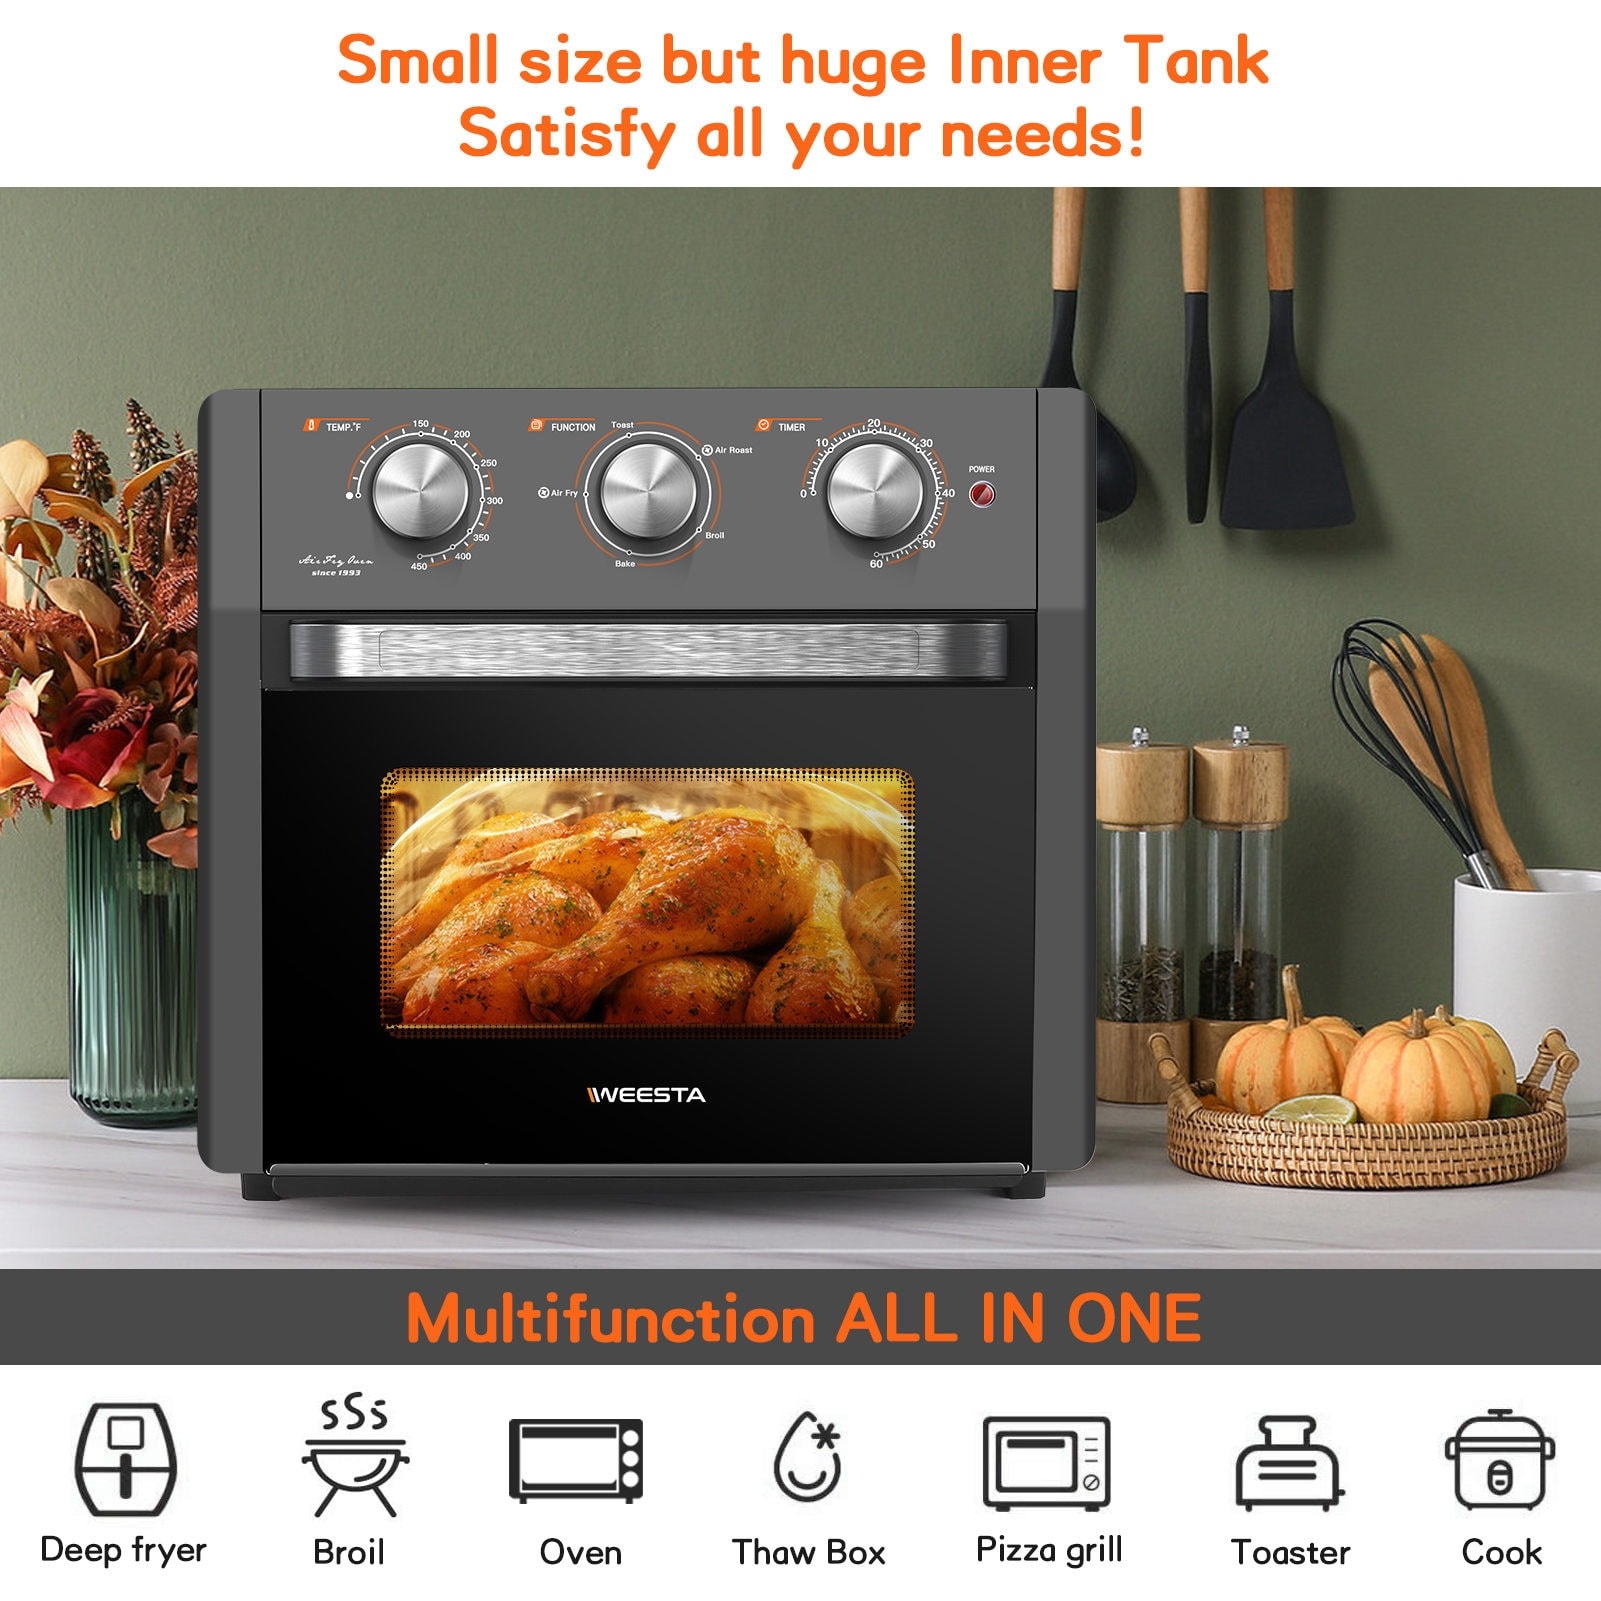 Air Fryer Toaster Oven Combo - Bed Bath & Beyond - 35162959